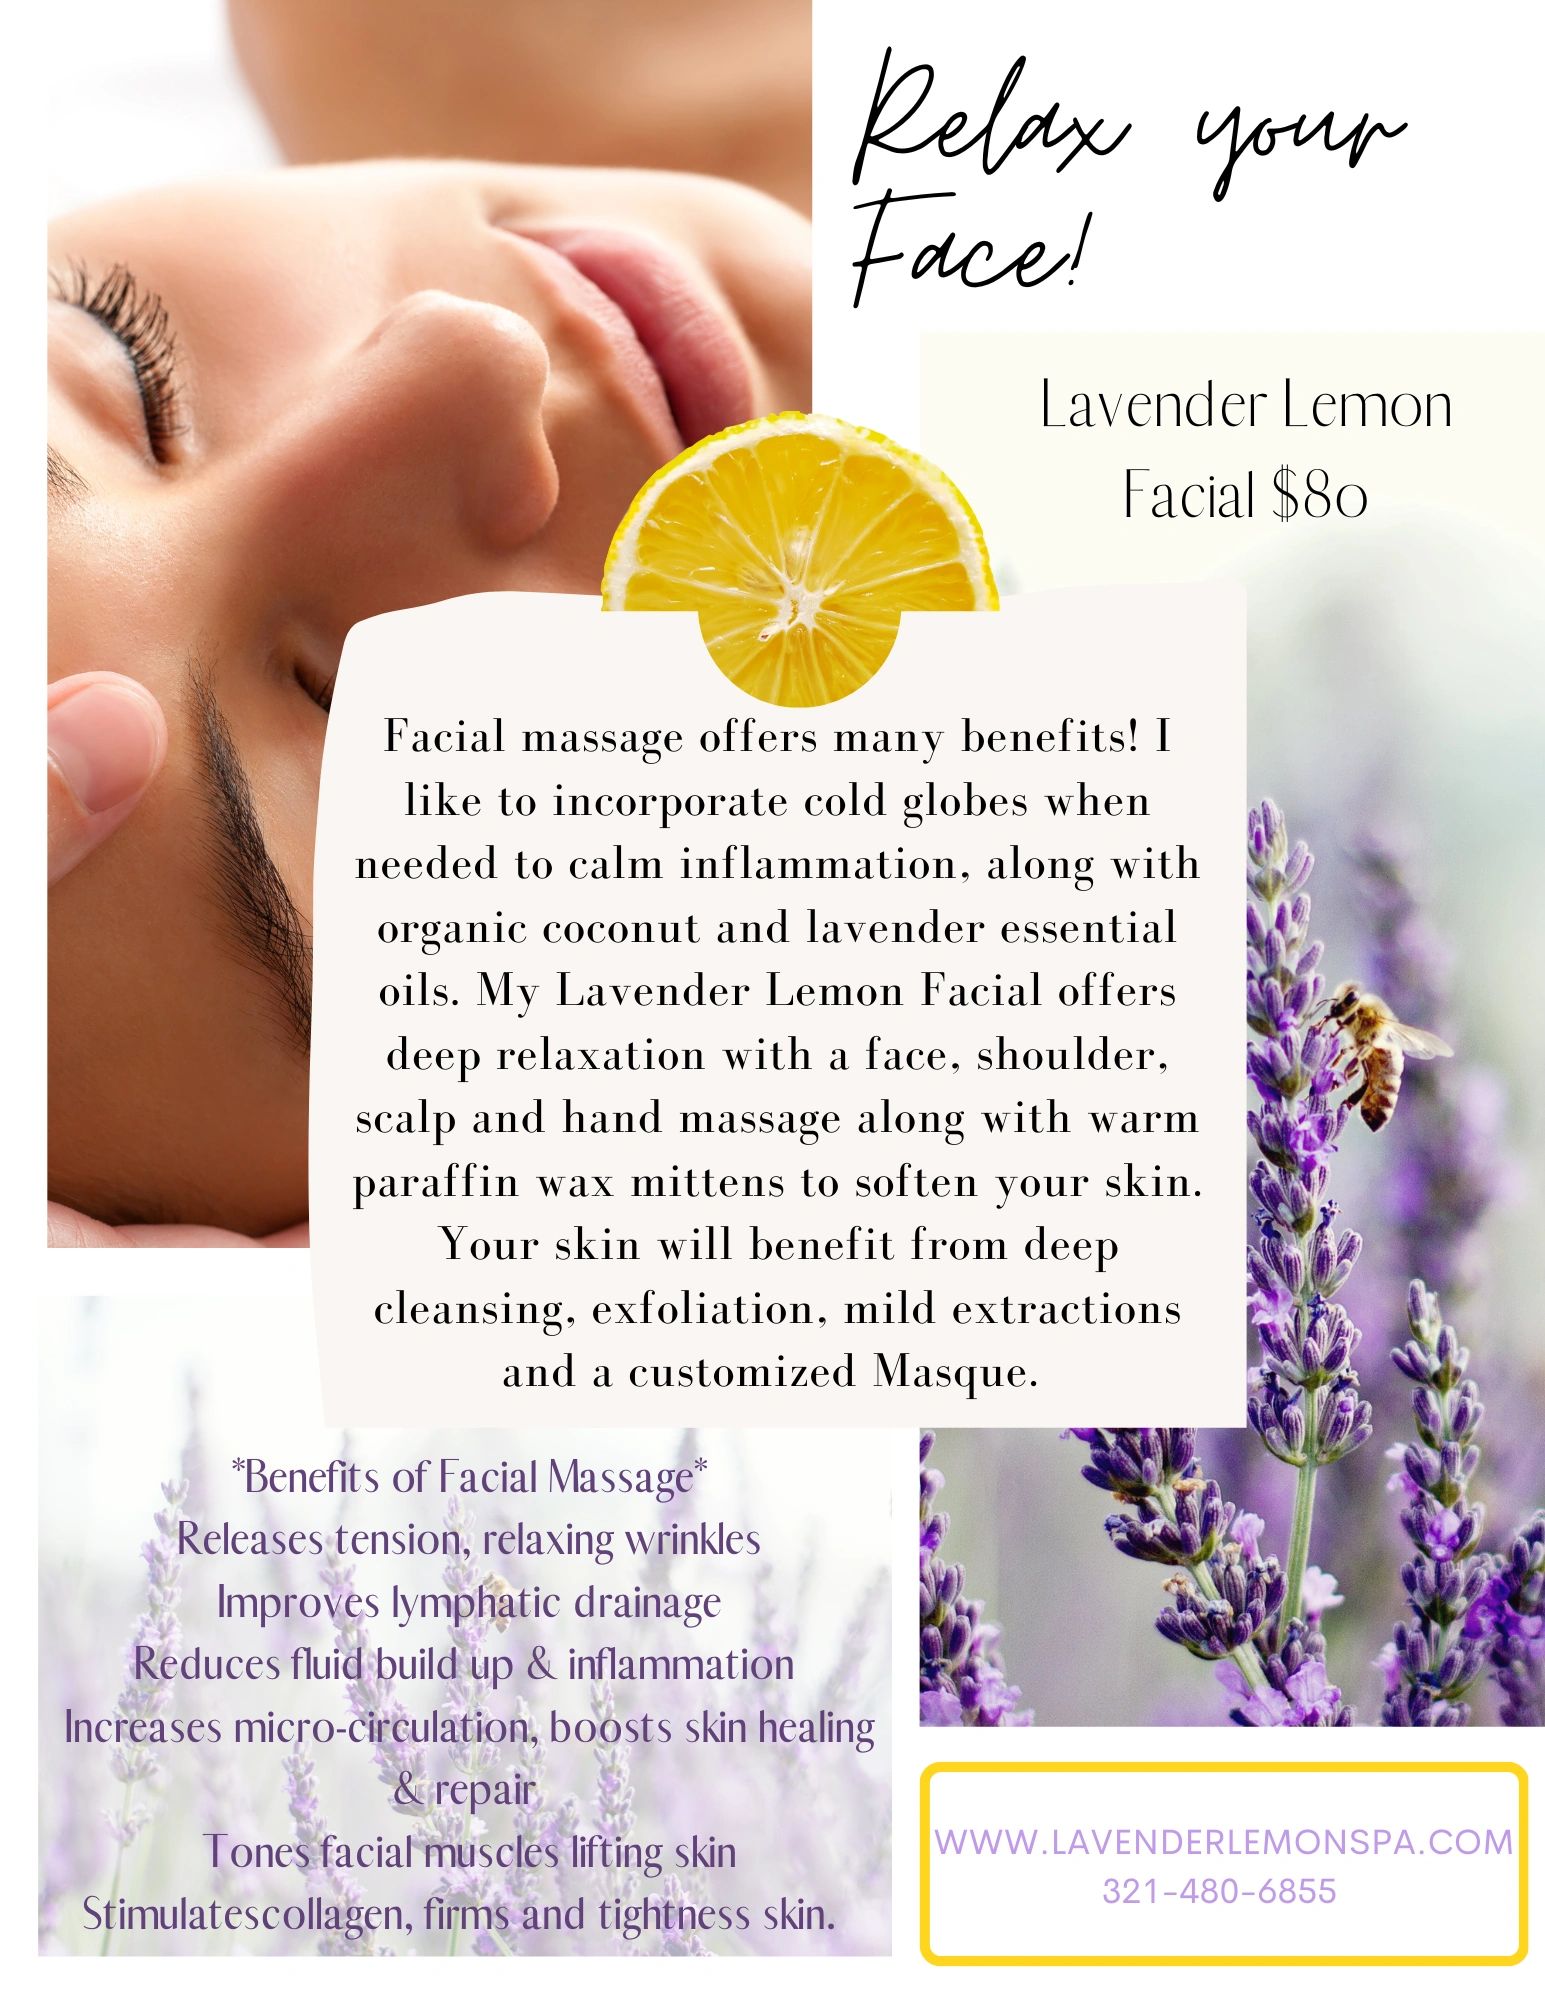 Benefits of lavender essential oils and facial massage!